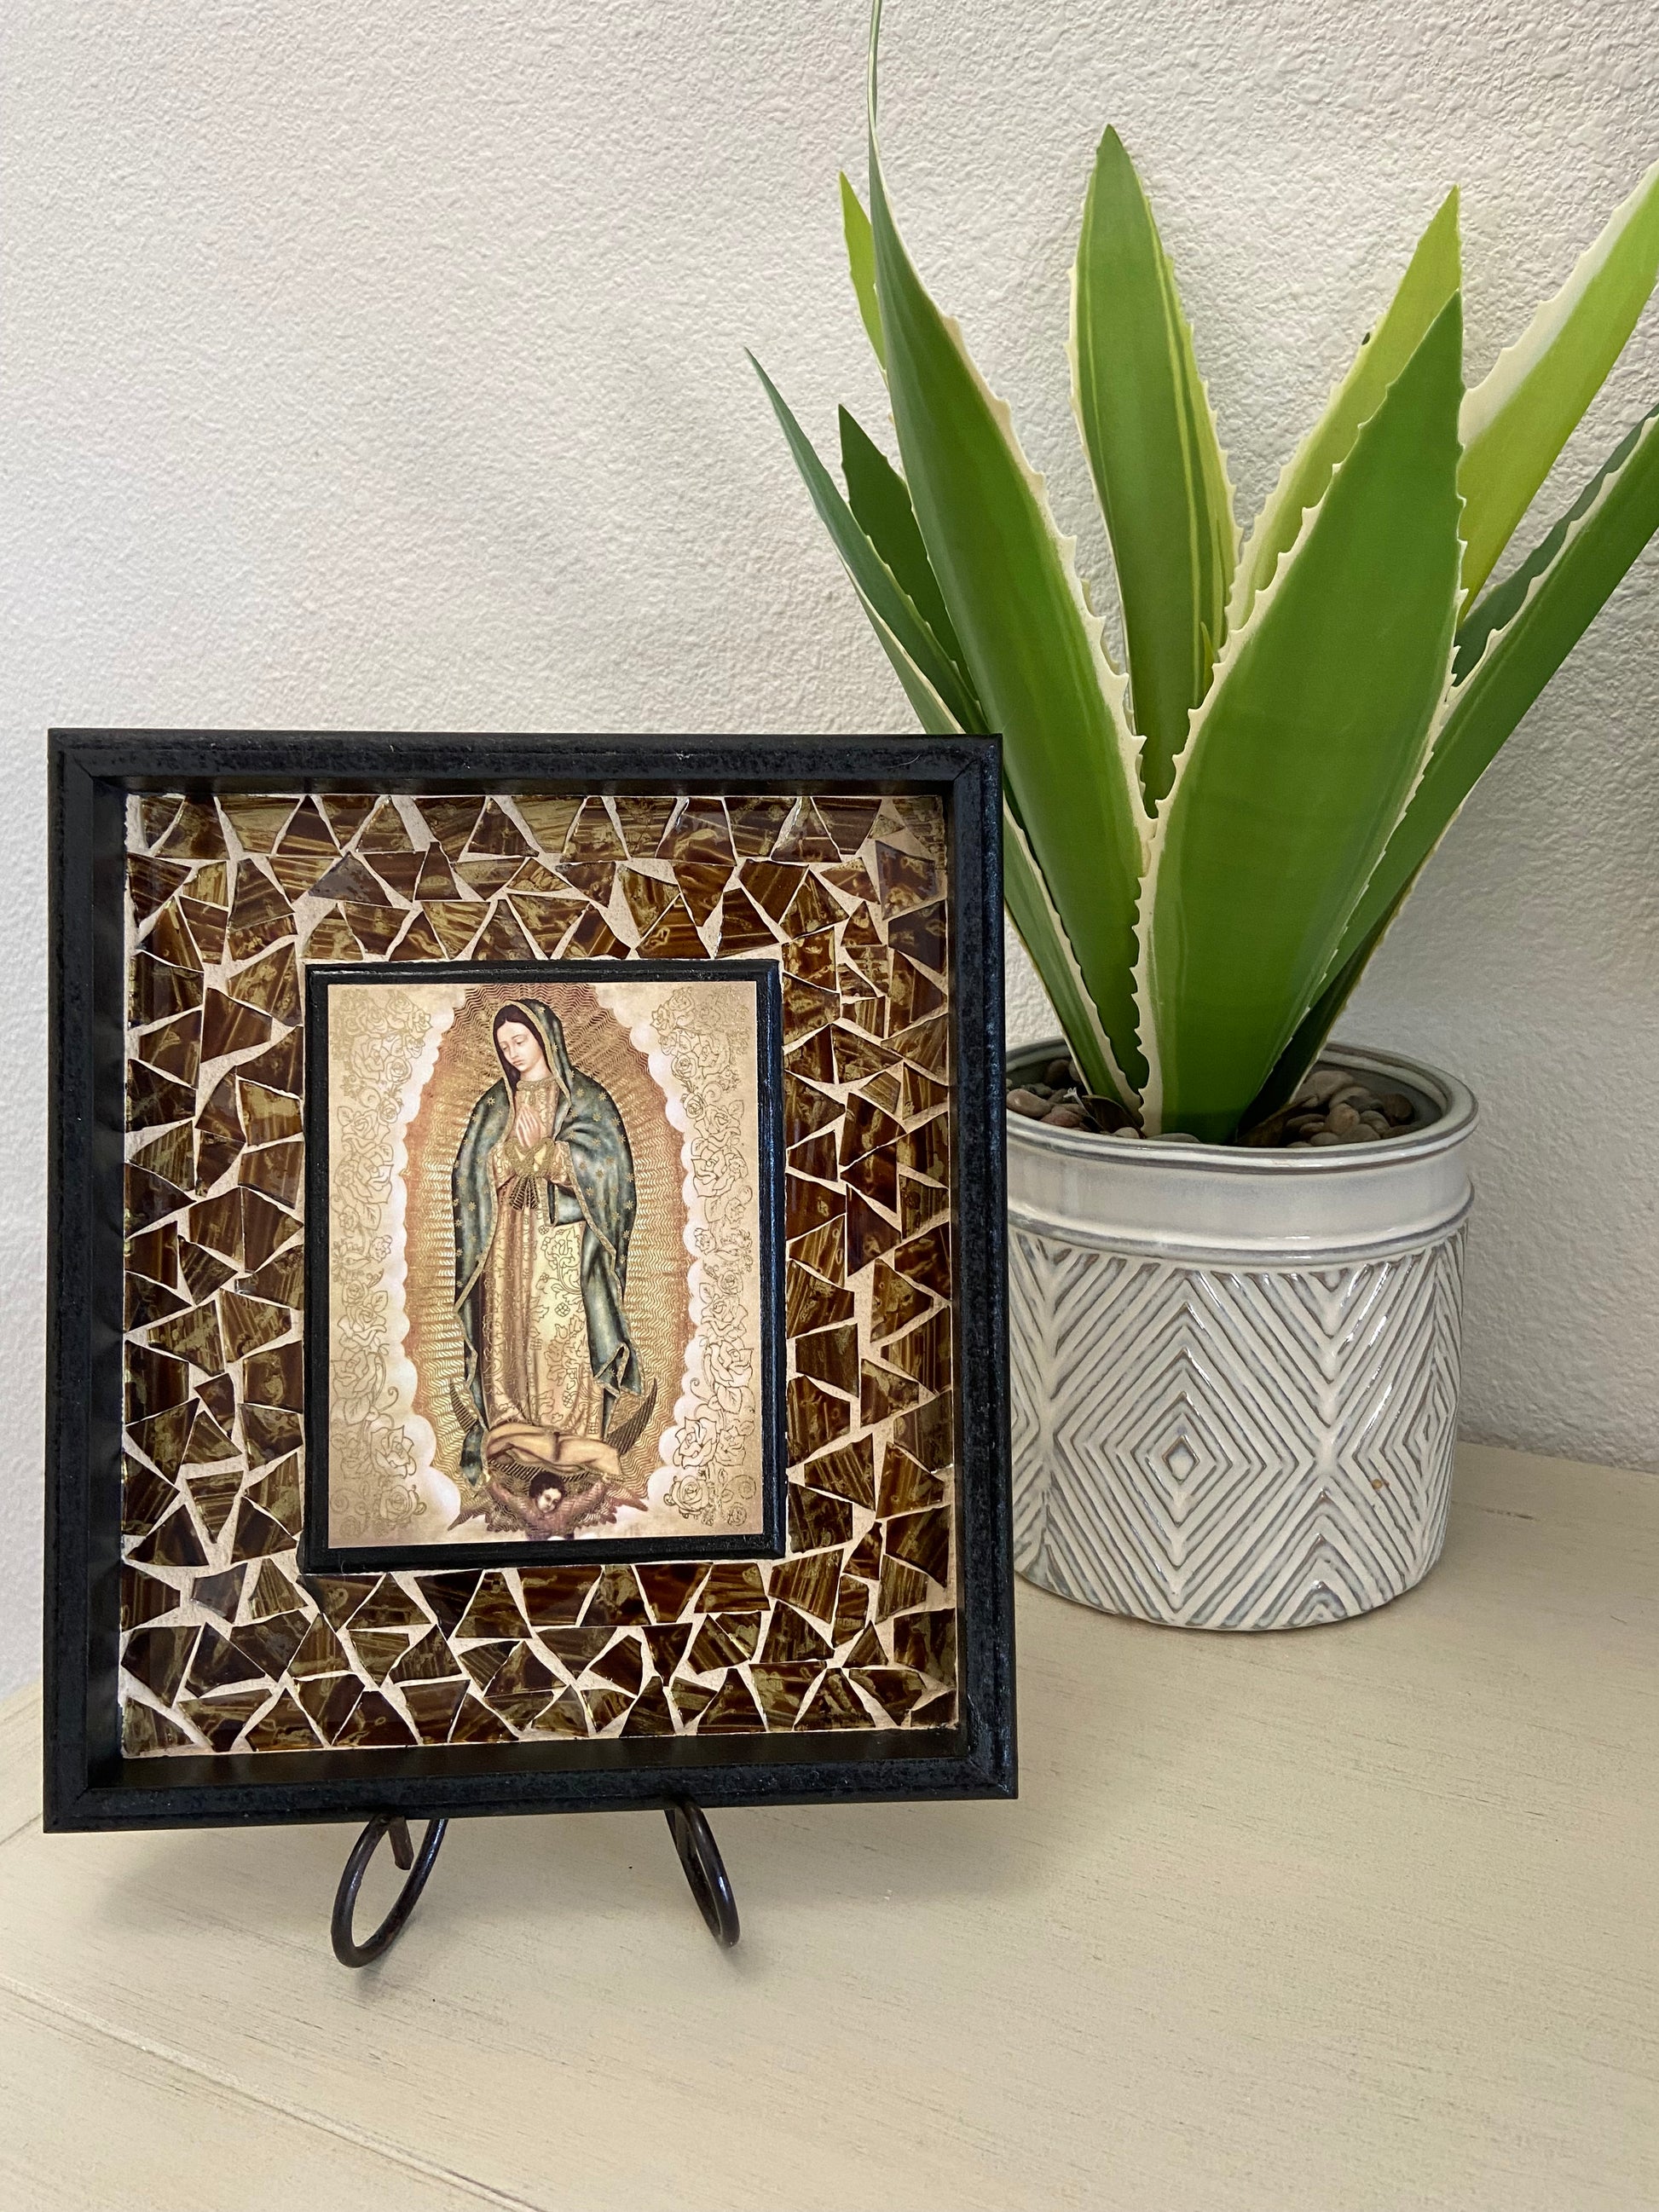 Our Lady of Guadalupe Frame Artwork Mosaic